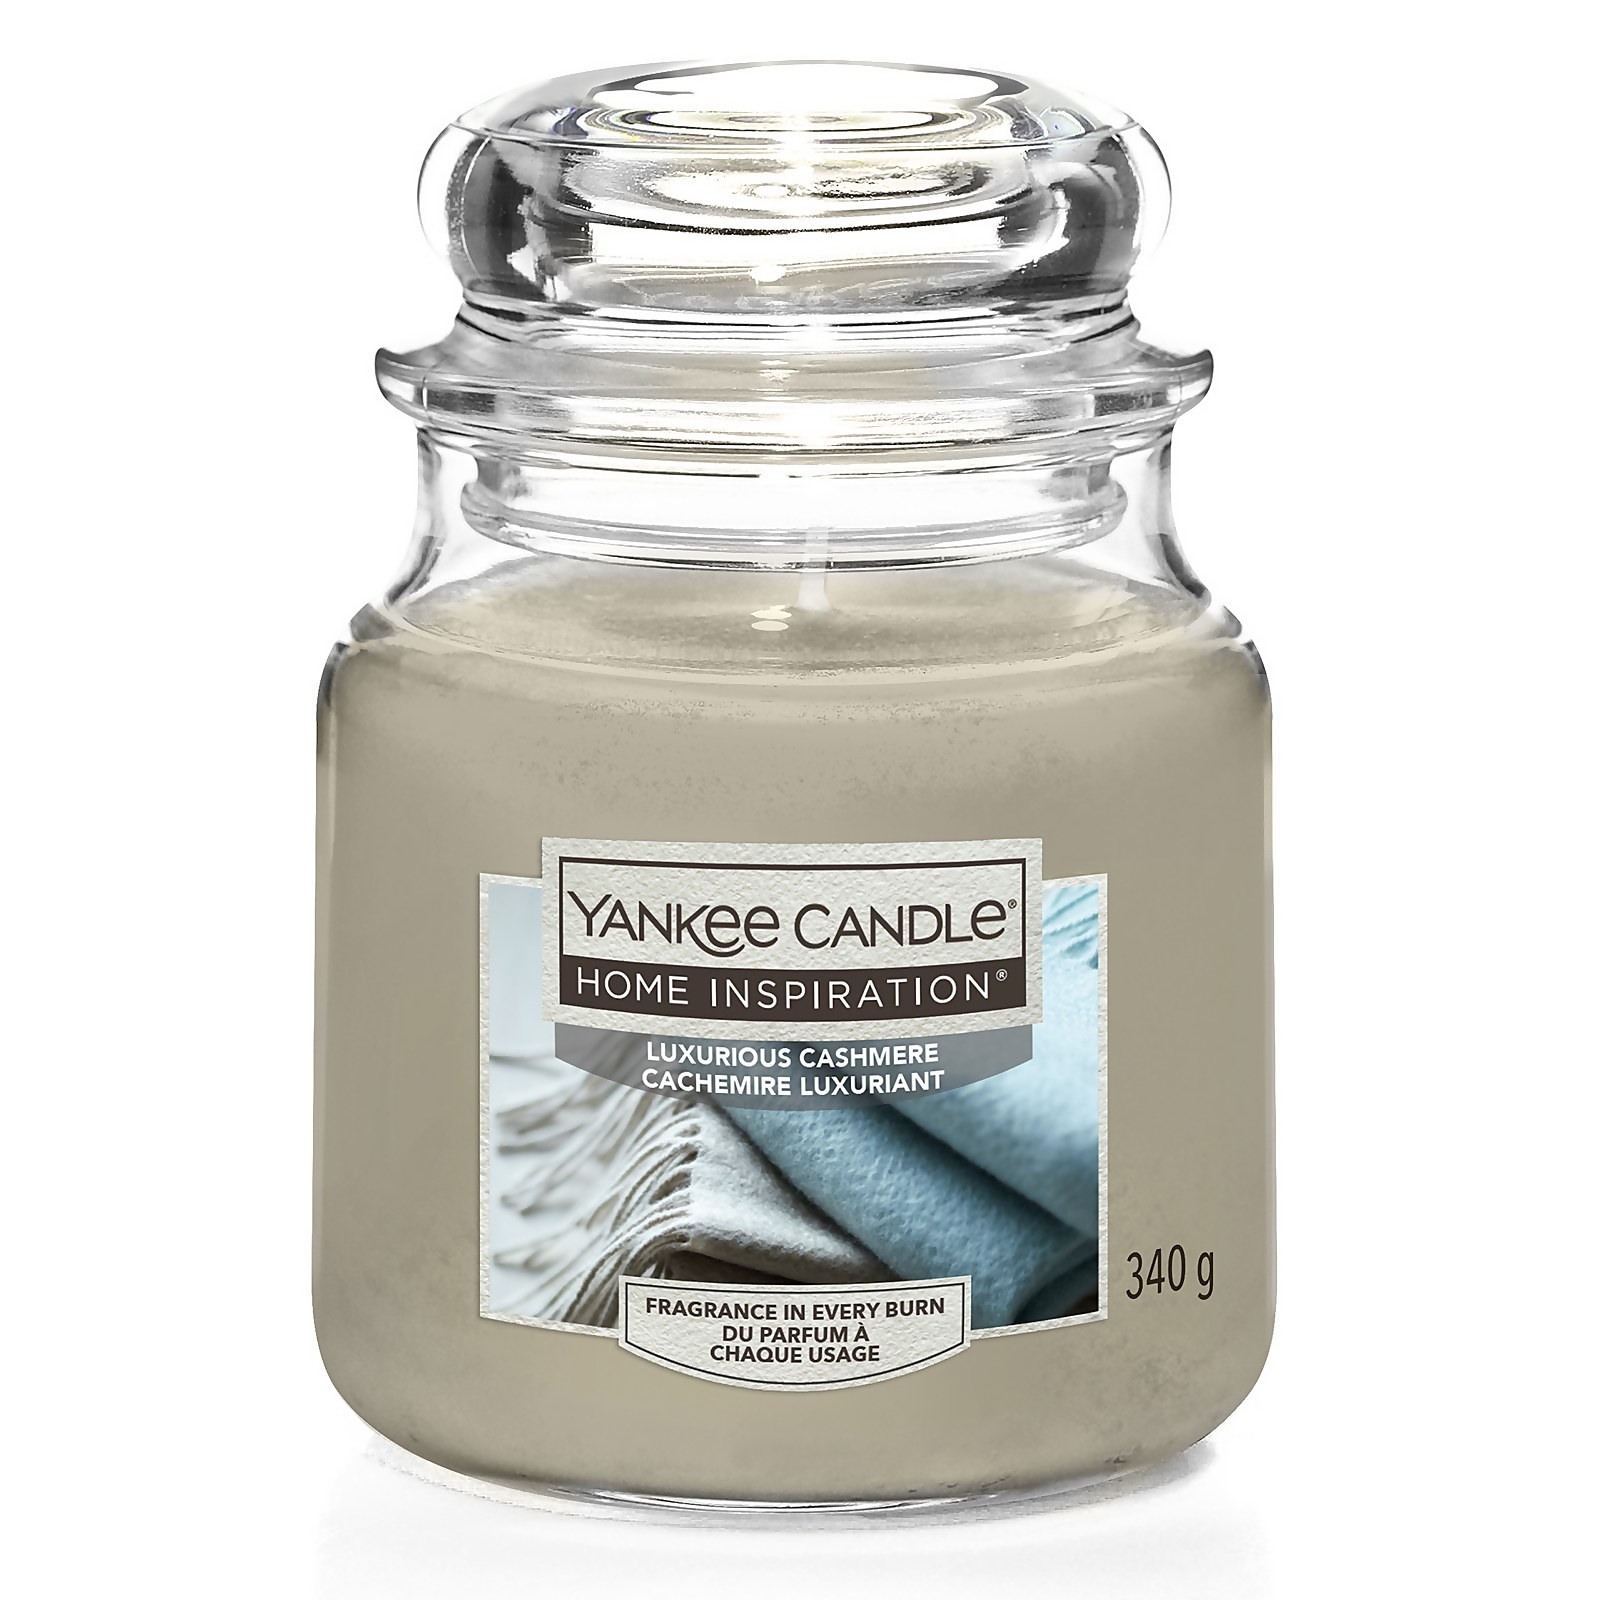 Photo of Yankee Candle Home Inspiration Scented Candle - Medium Jar - Luxurious Cashmere